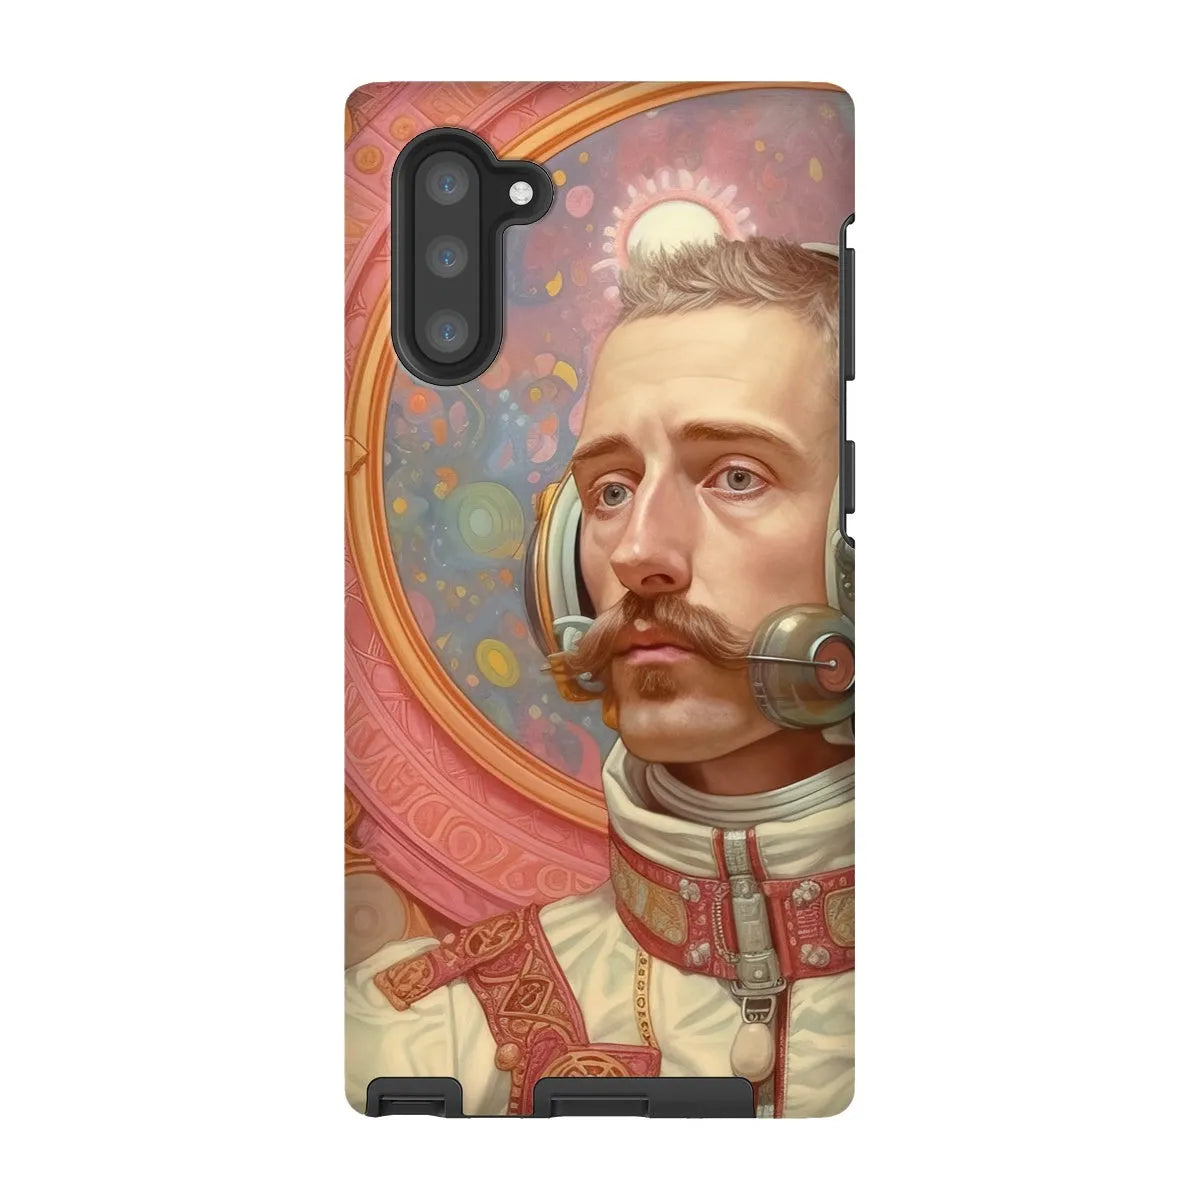 Axel - Gay German Astronaut Aesthetic Art Phone Case - Samsung Galaxy Note 10 / Matte - Mobile Phone Cases - Aesthetic